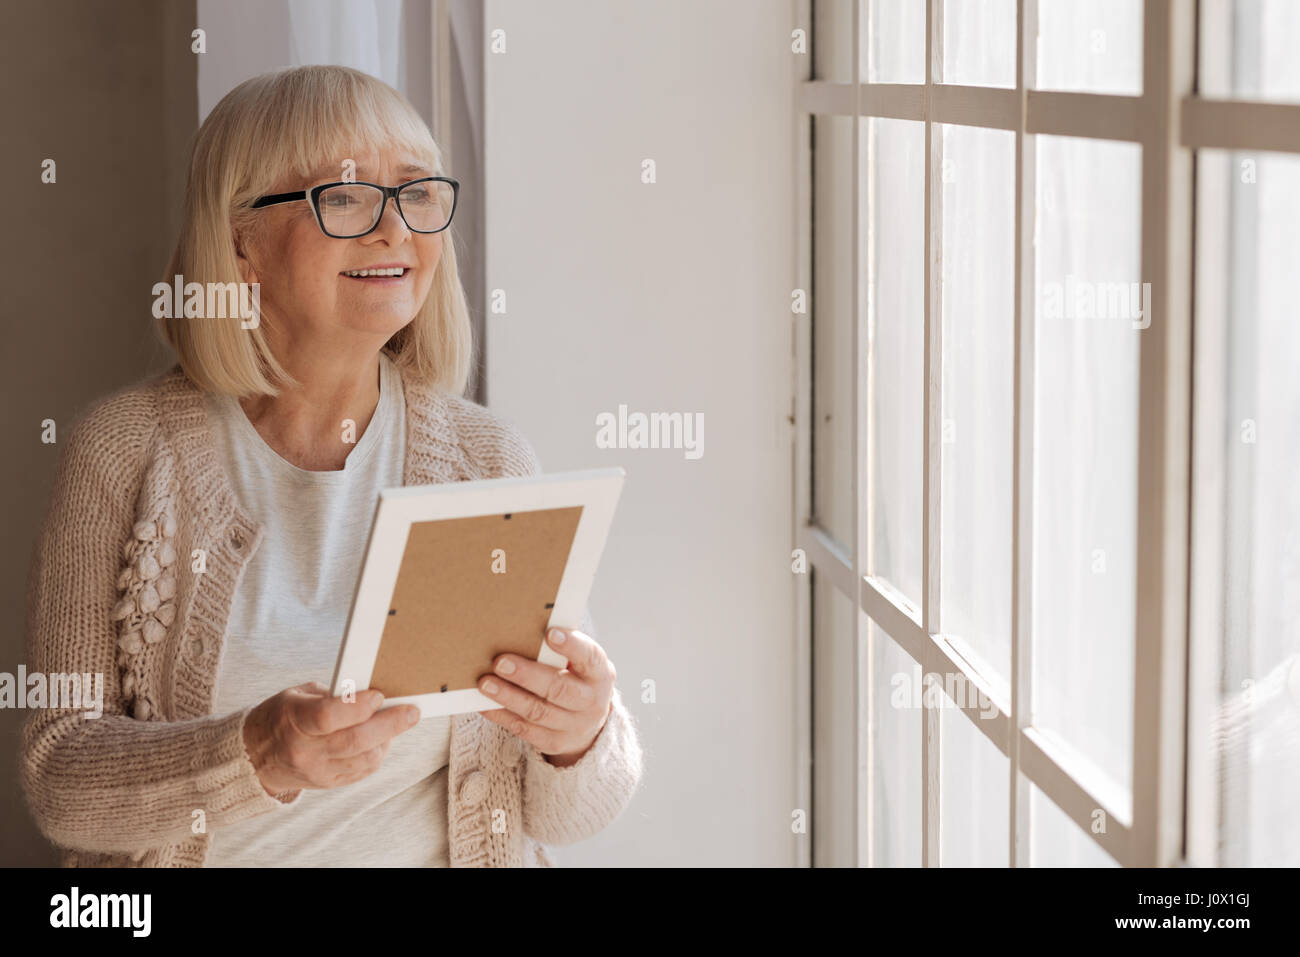 Positive mood. Delighted nice aged woman looking into the window and smiling while holding a photograph Stock Photo